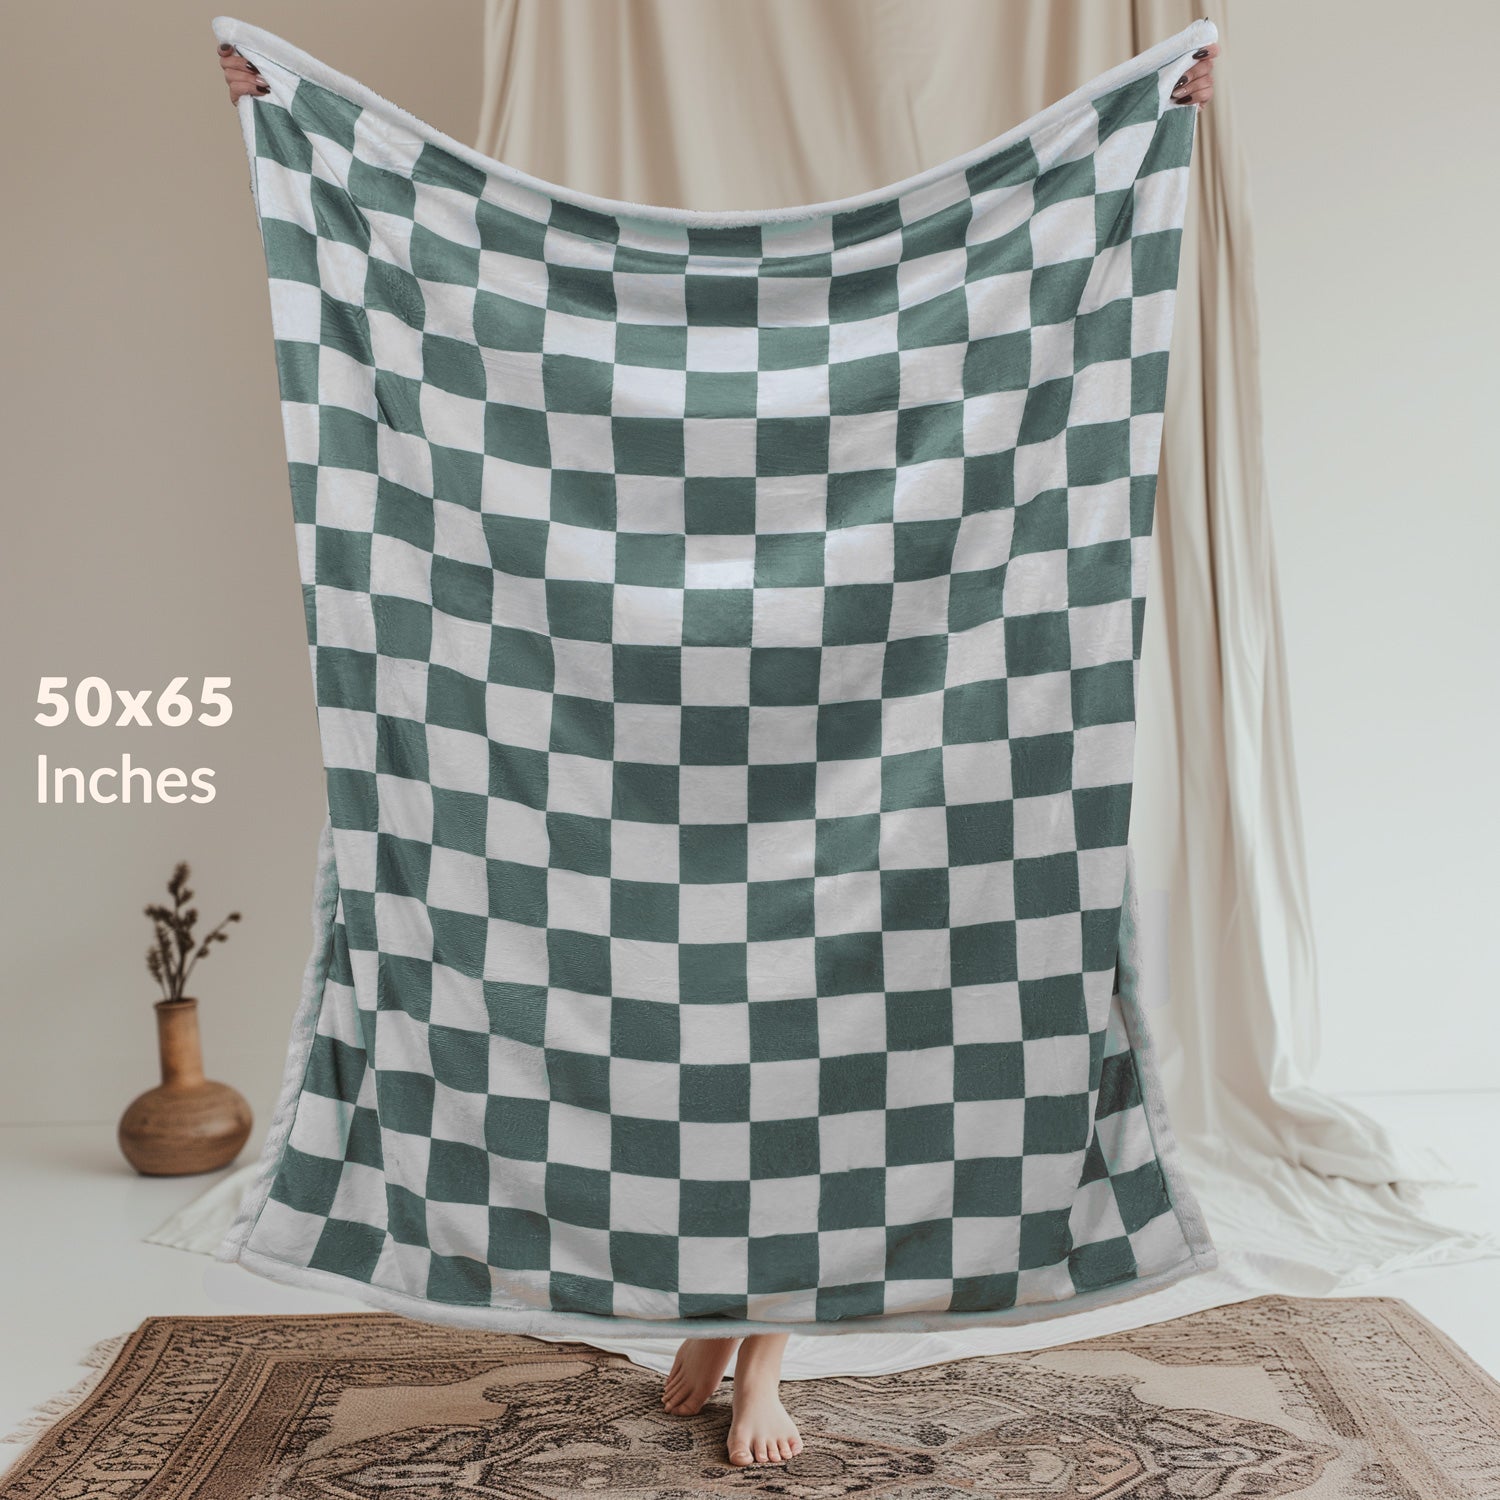 Checkered Blanket with Feet Pocket, Ultra Soft Sherpa Cozy Blanket, Green Checkered Throw, Lightweight Checkerboard blanket, Microfiber Blanket, Checkered Throw, For Sofa, Couch, Travel (Green Sage)